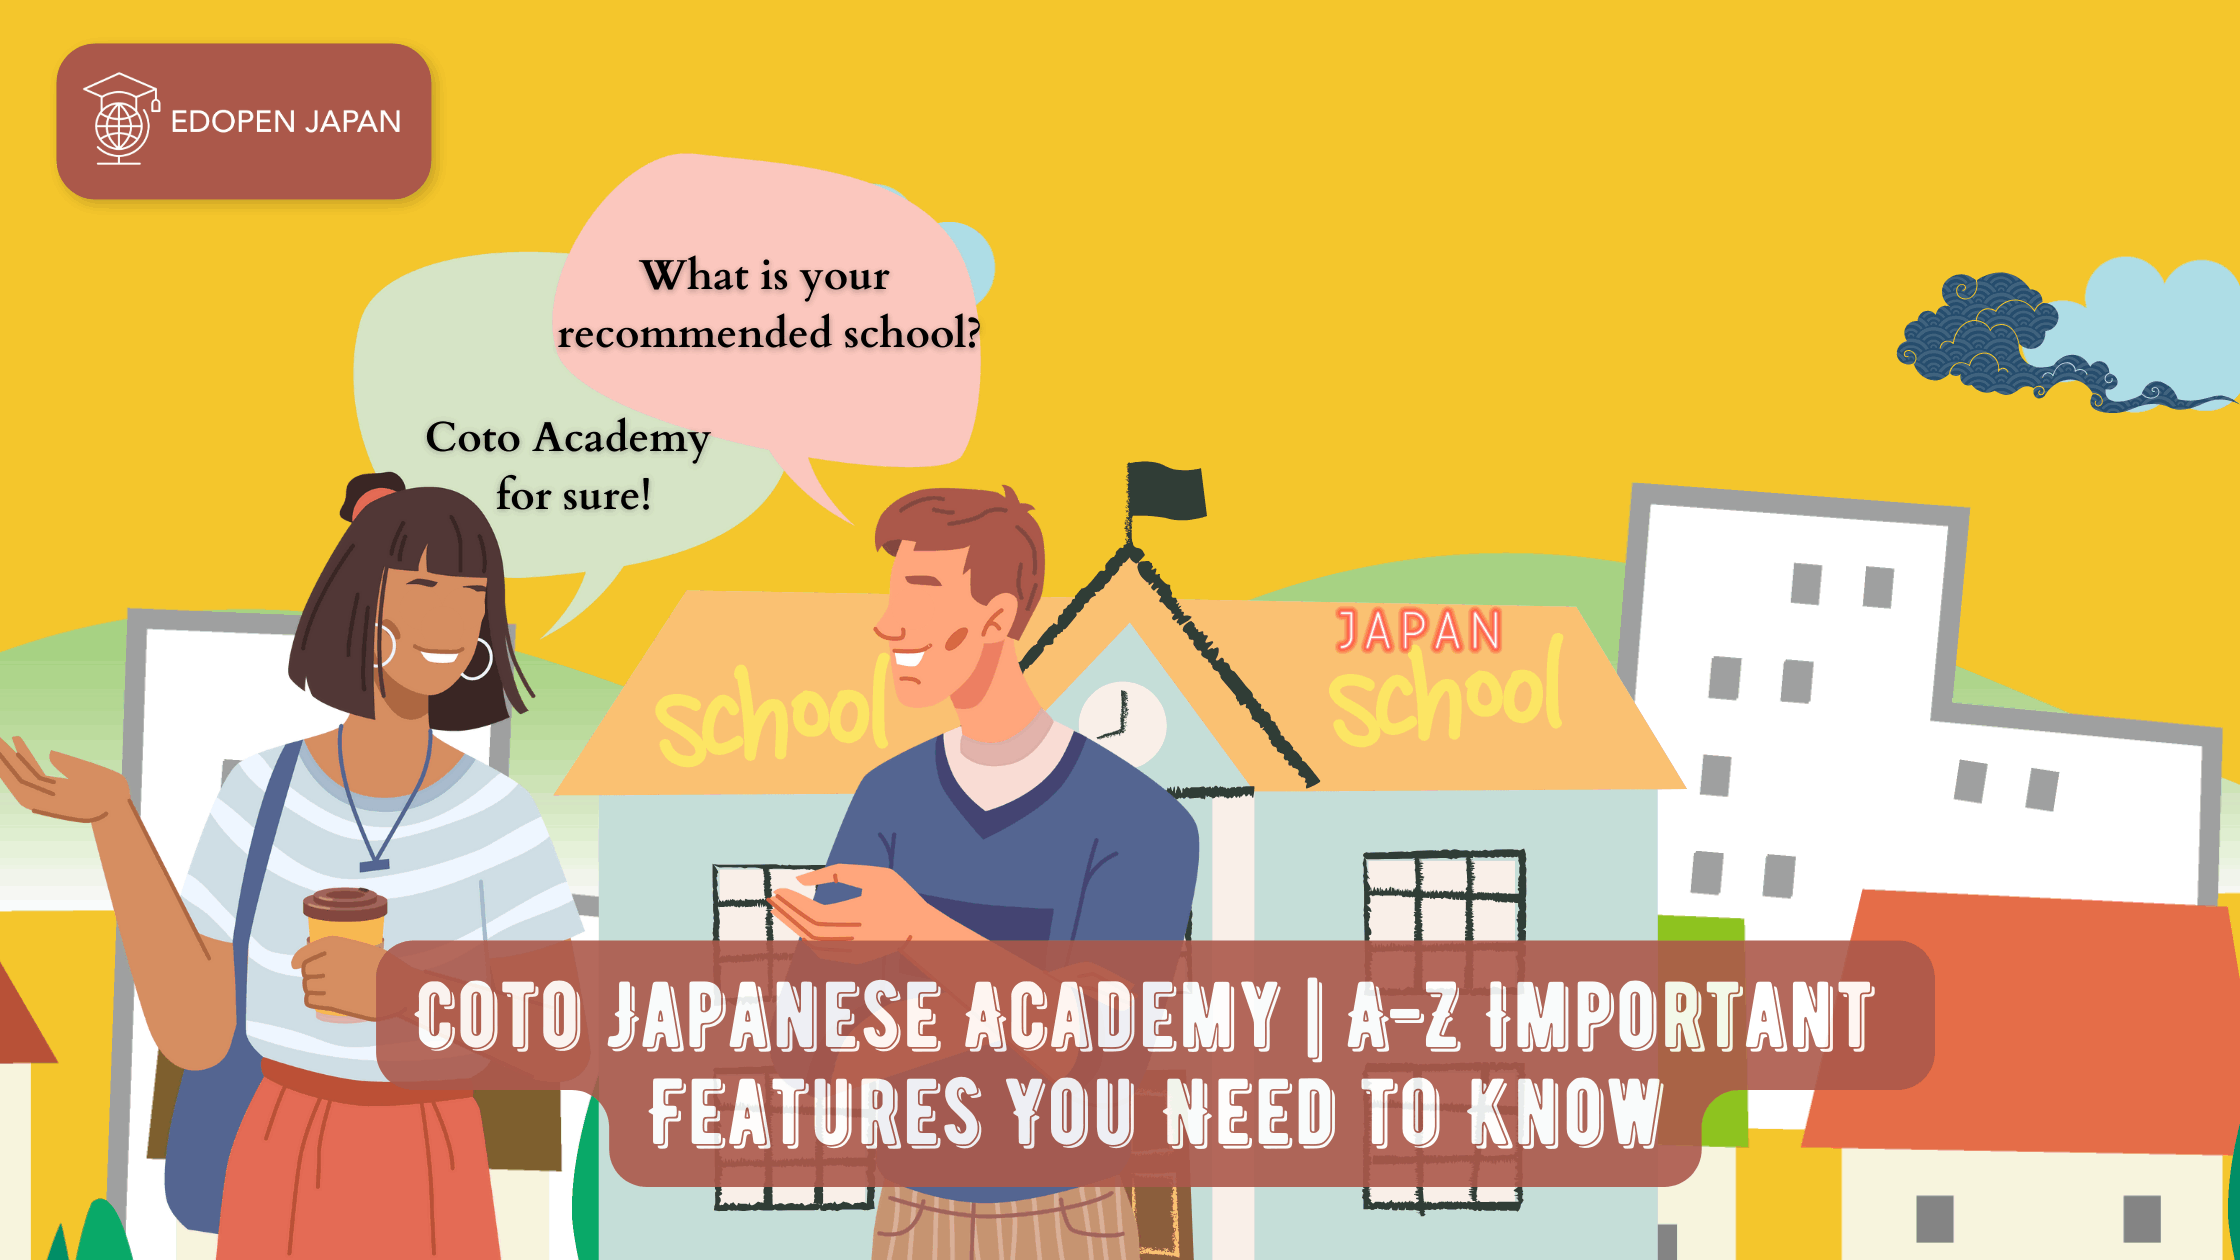 Coto Japanese Academy | A-Z Important Features You Need to Know - EDOPEN Japan